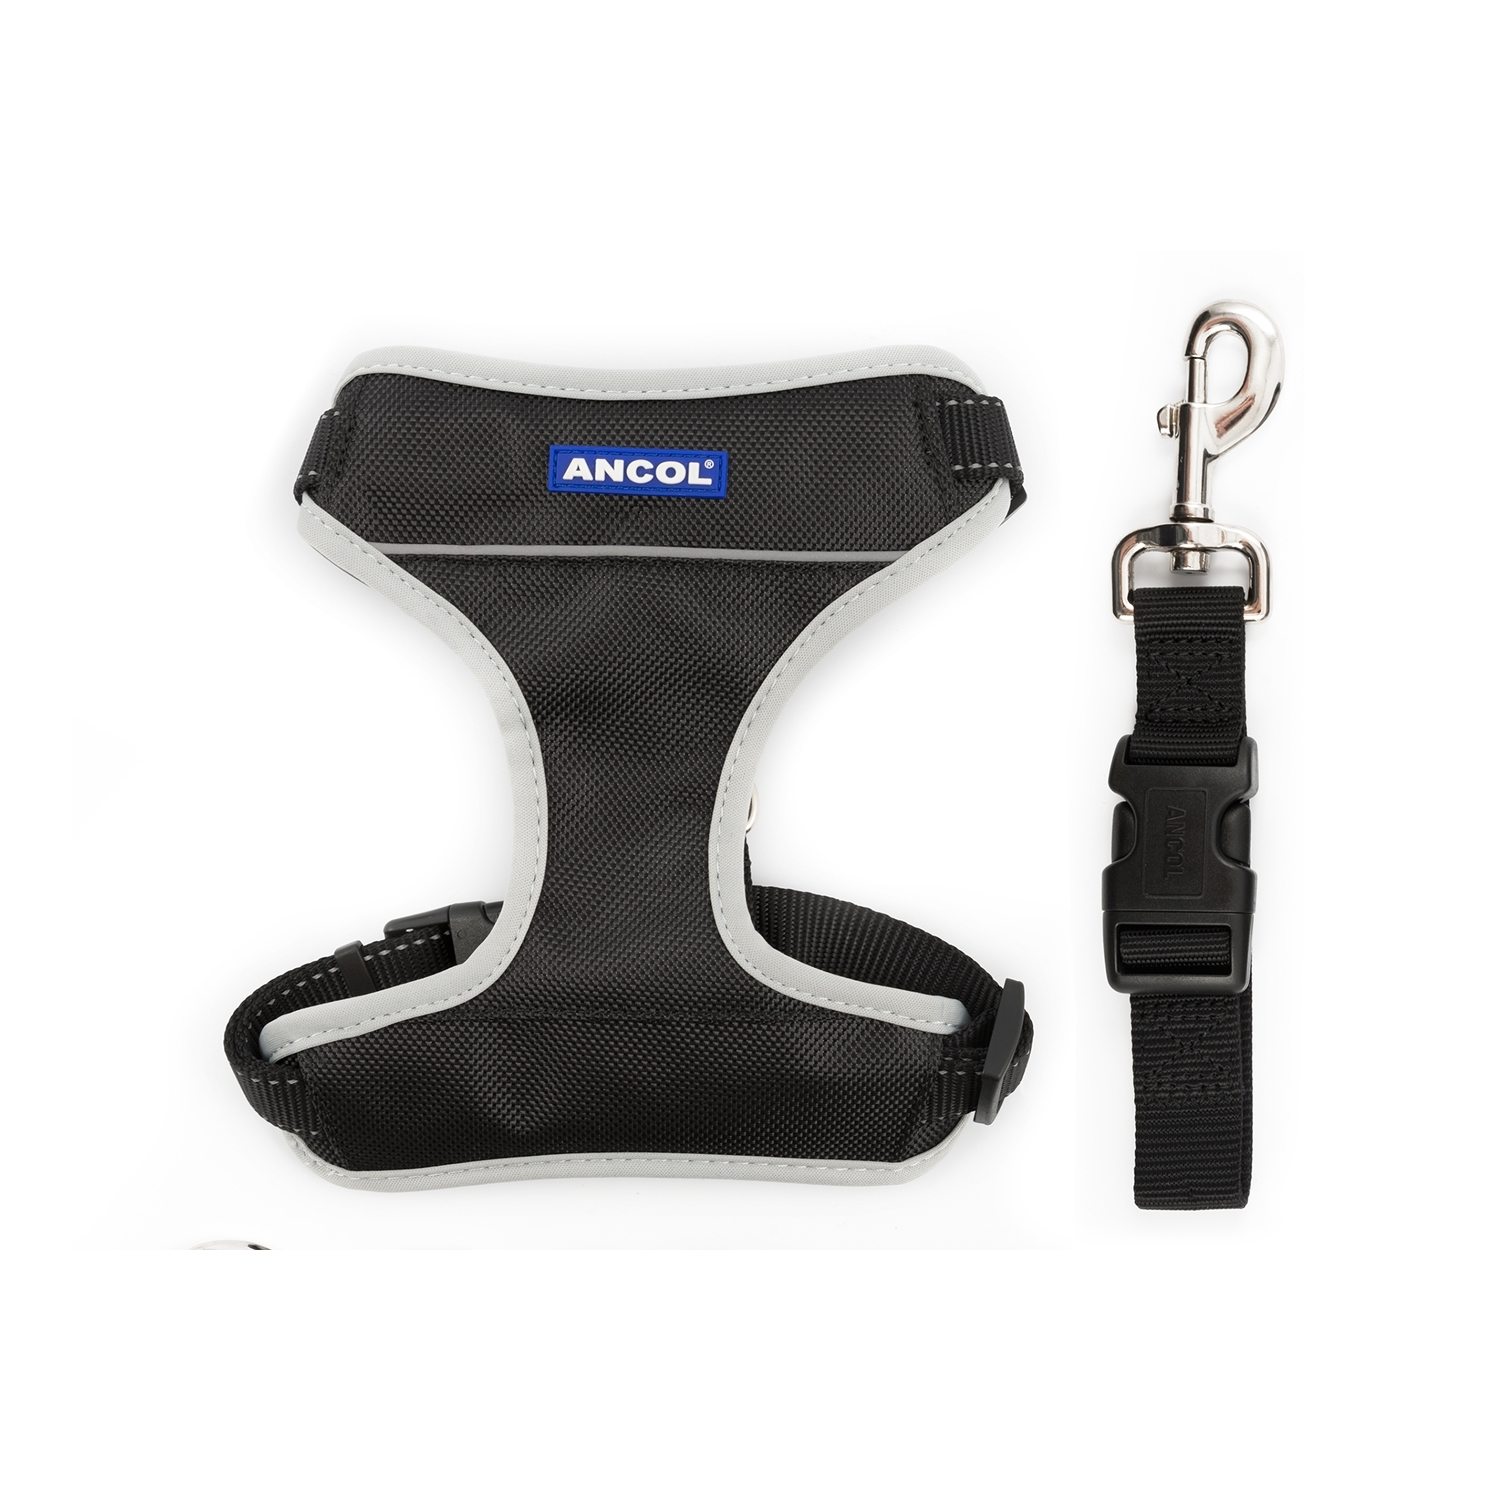 Ancol Travel and Exercise Dog Harness - Extra Large Image 1